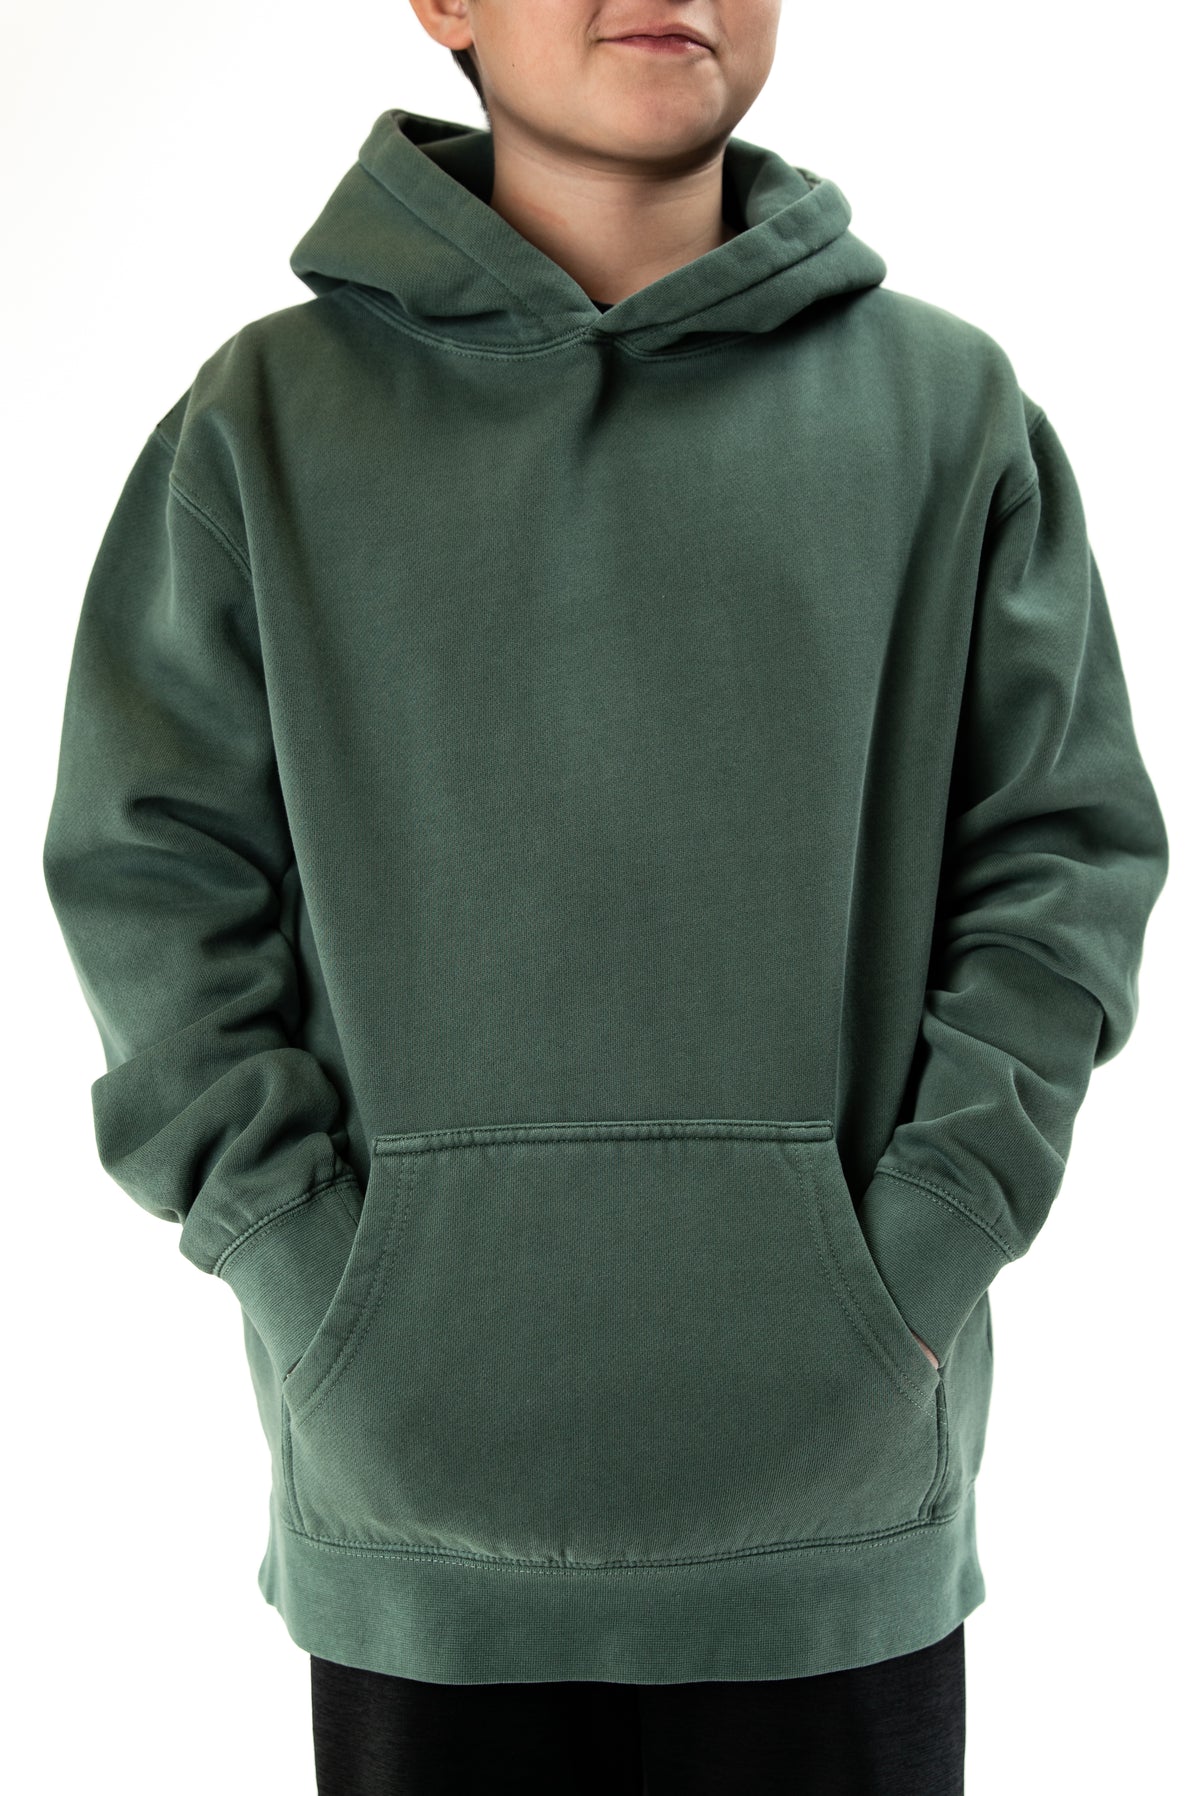 IND4001YPD - Youth Heavyweight Pigment Dye Hoodie